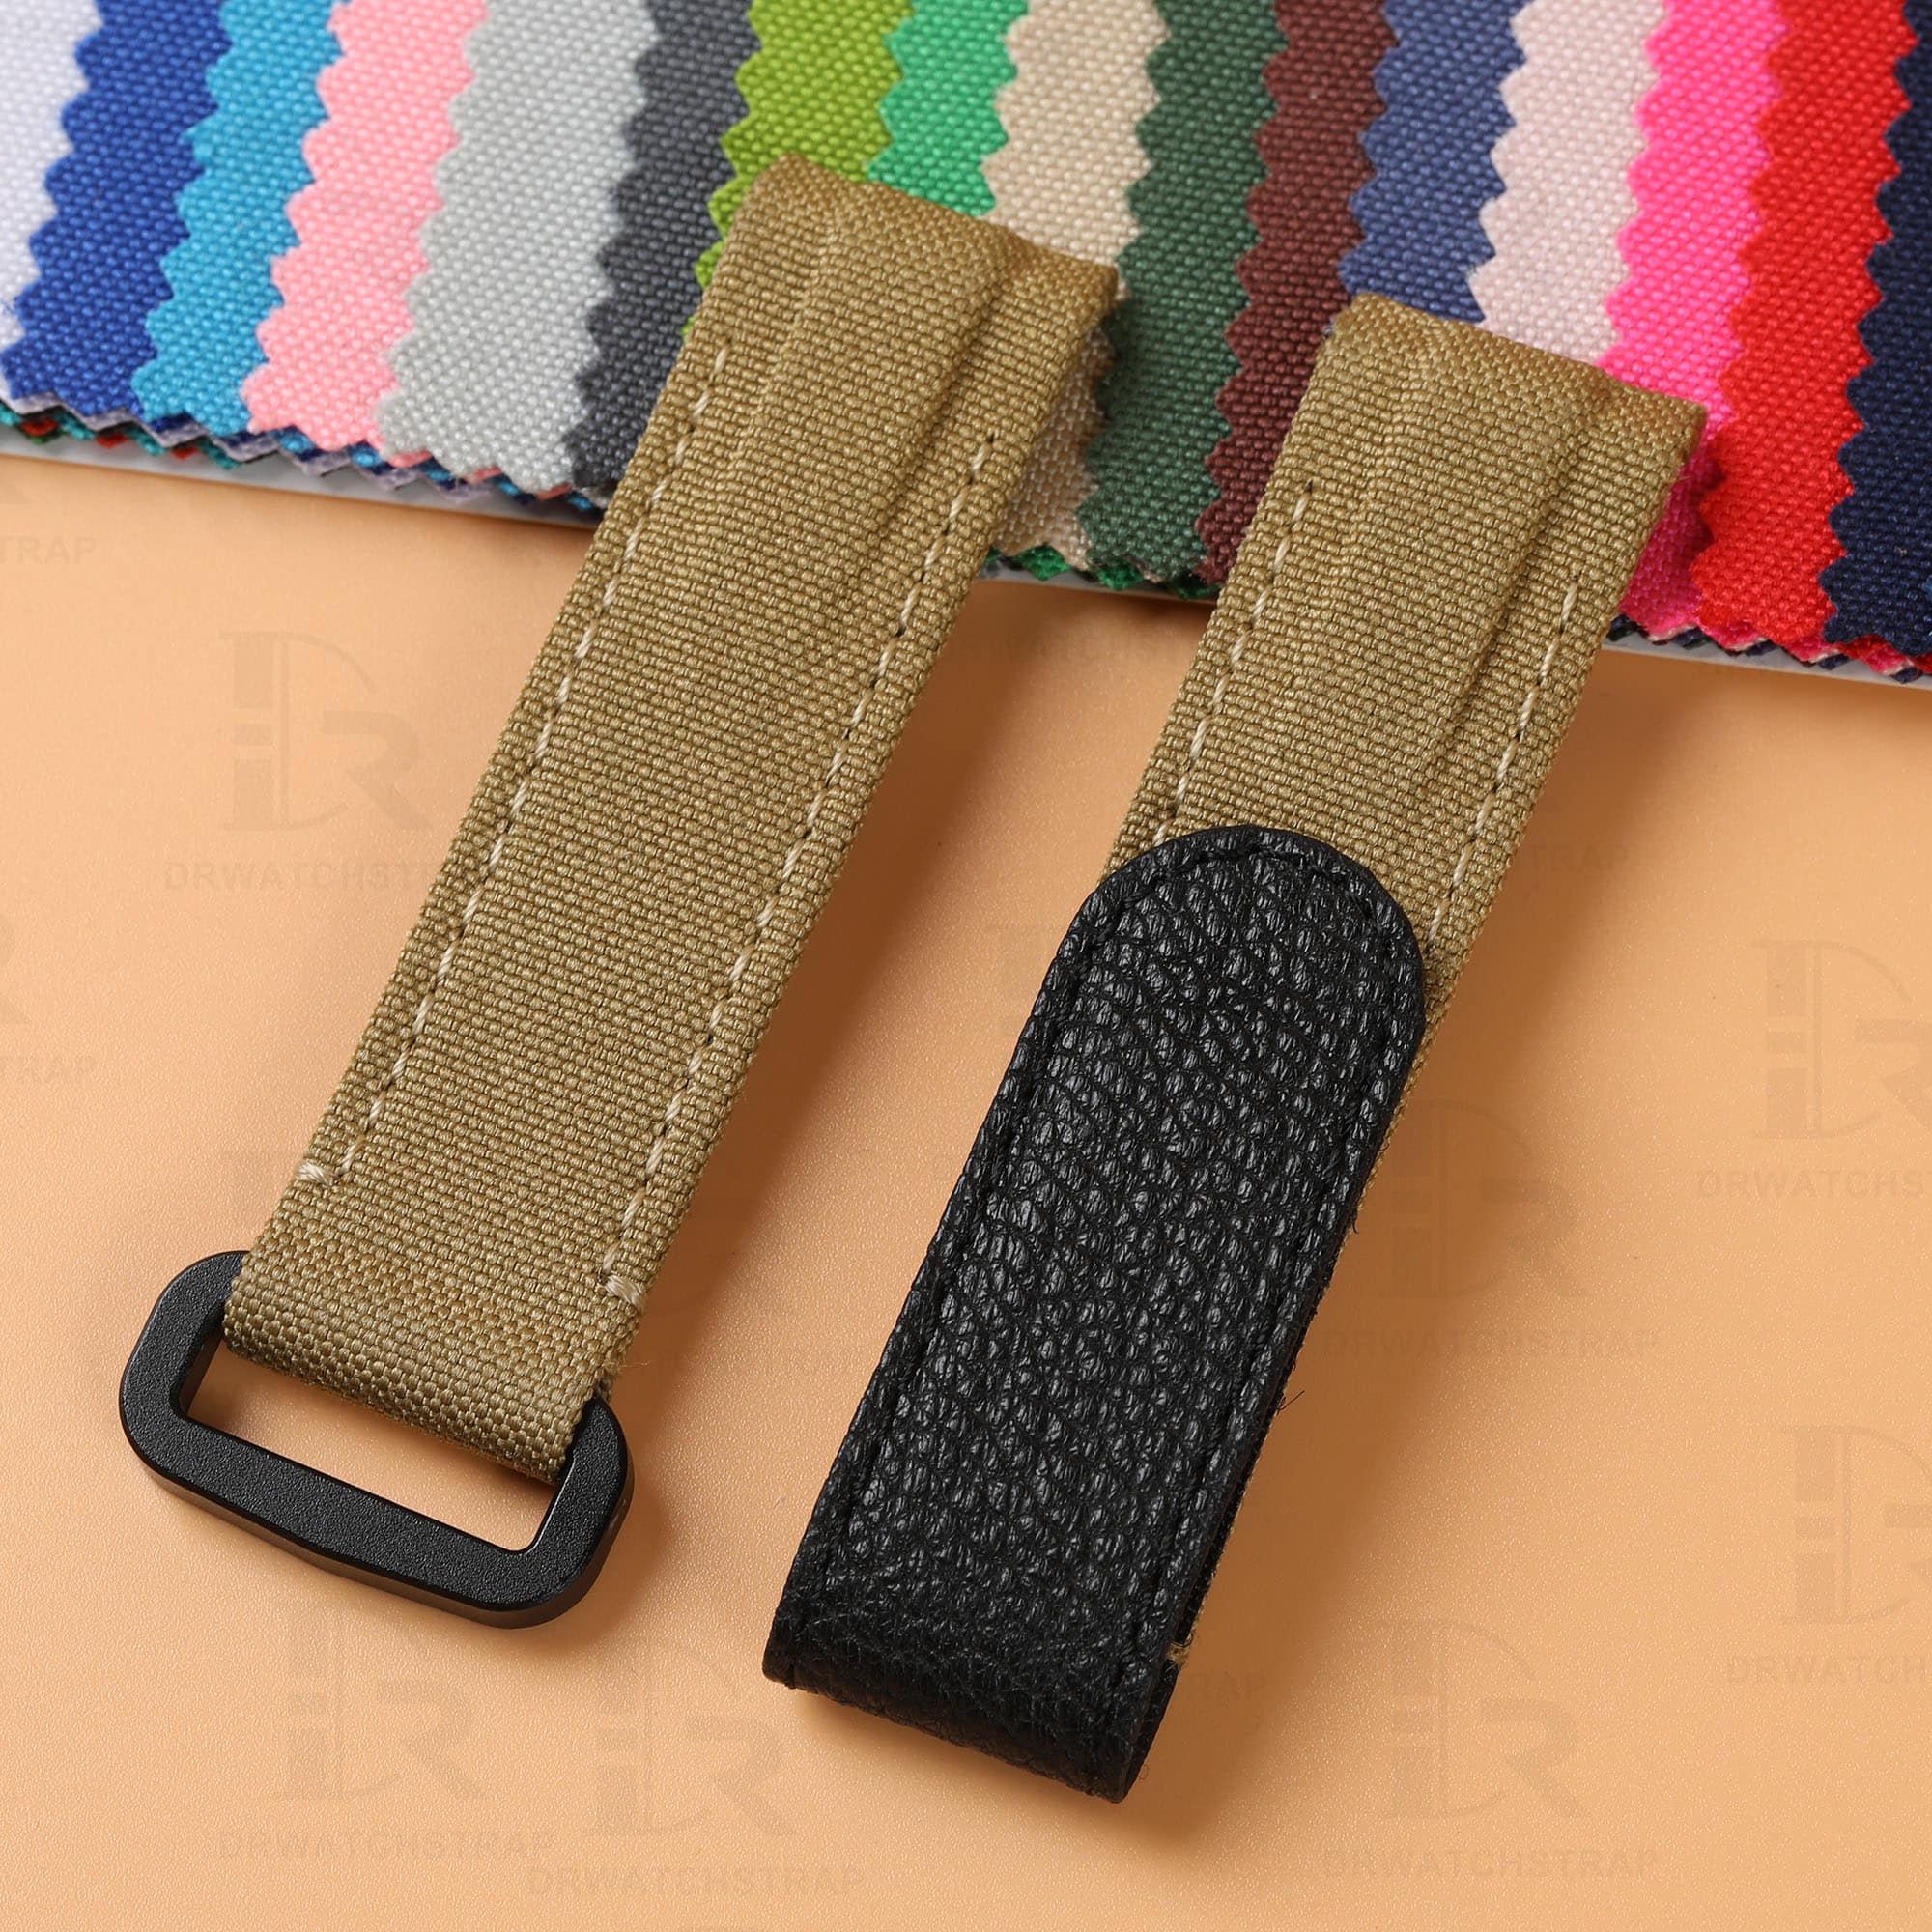 Custom velcro watch band for Rolex DIW Daytona curved end 2 pin spring holes